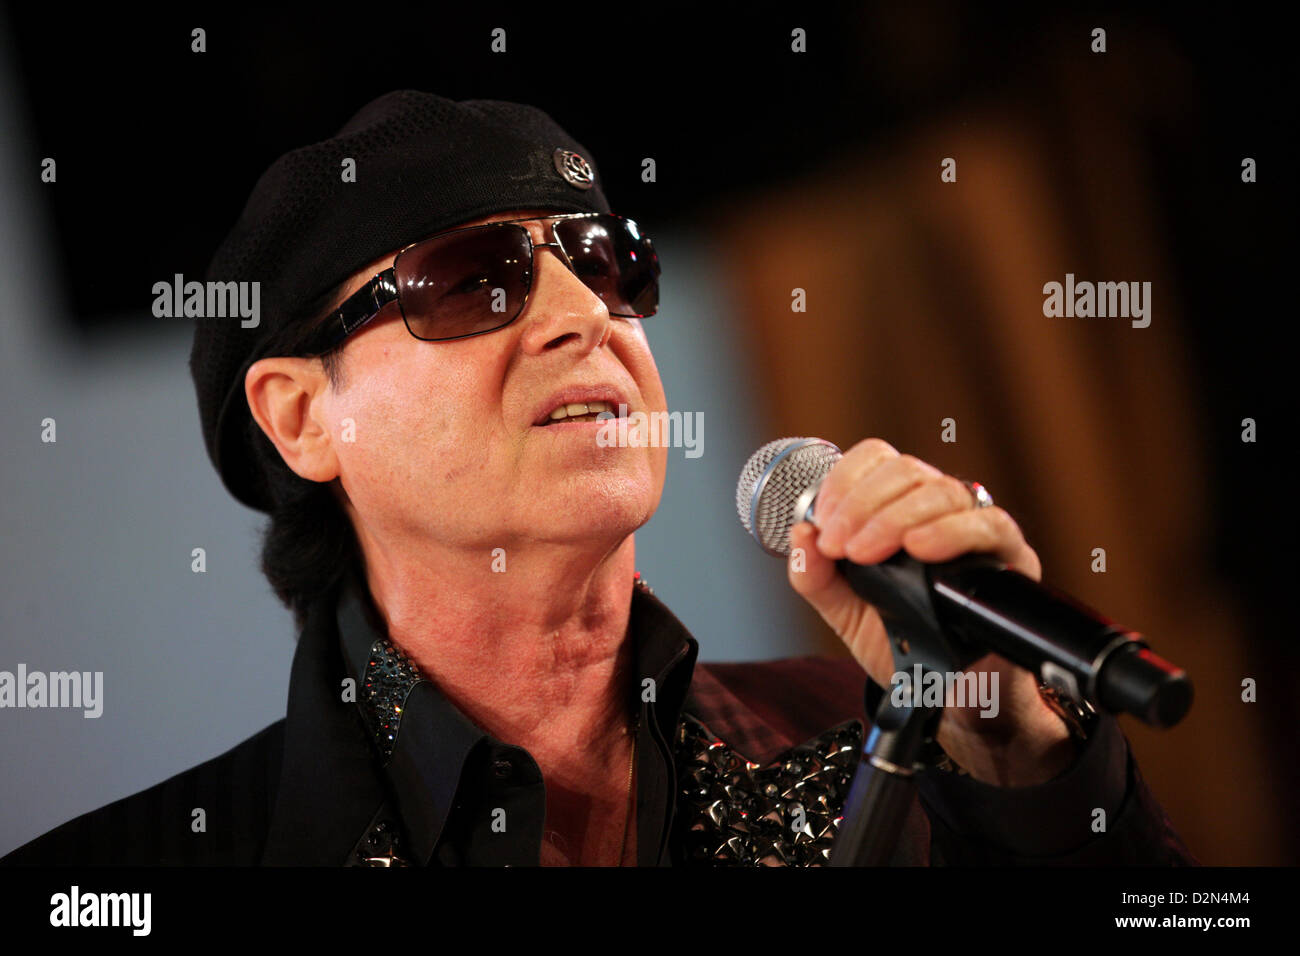 Singer Klaus Meine from The Scorpions performs in the Alter Wartesaal during Lambertz Monday Night in Cologne, Germany, 28 January 2013. Photo: Rolf Vennenbernd Stock Photo